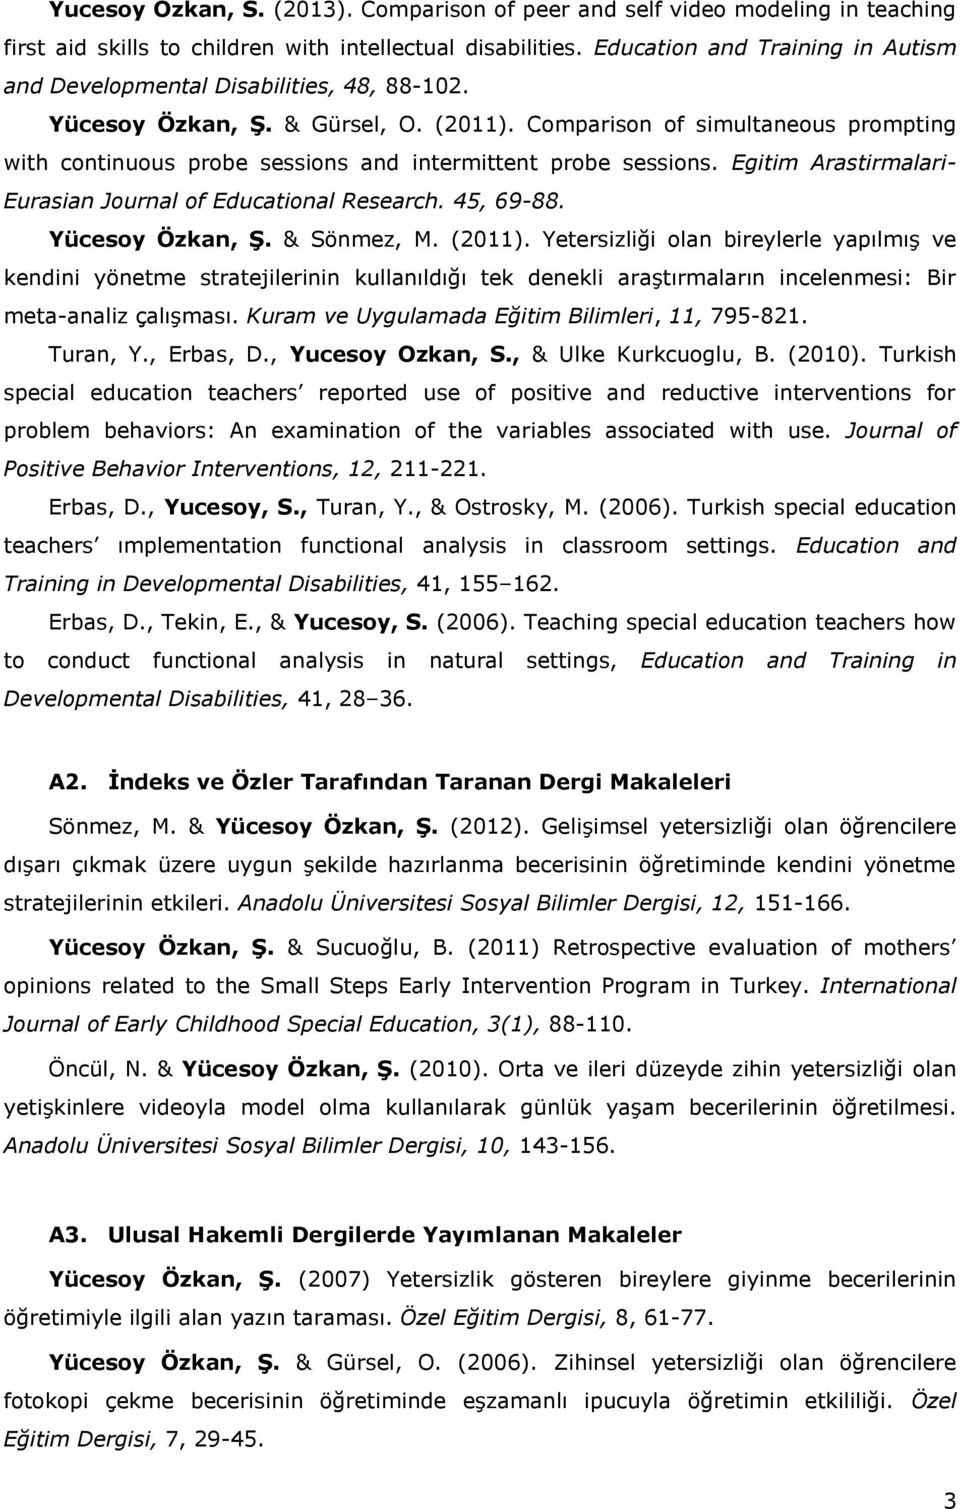 Comparison of simultaneous prompting with continuous probe sessions and intermittent probe sessions. Egitim Arastirmalari- Eurasian Journal of Educational Research. 45, 69-88. Yücesoy Özkan, Ş.